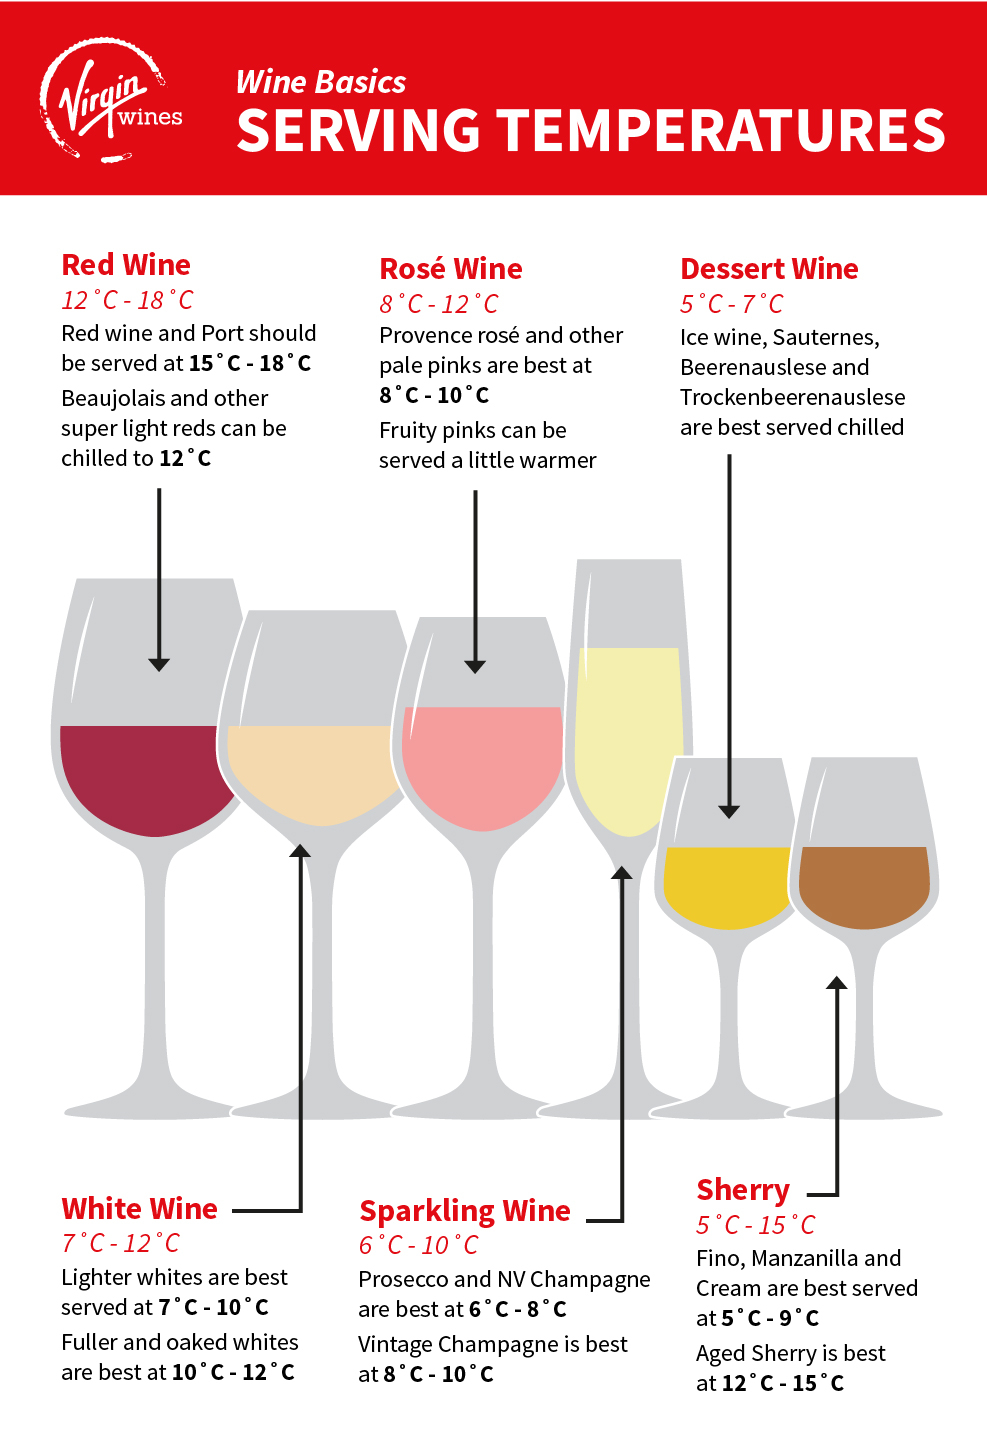 https://www.virginwines.co.uk/hub/wp-content/uploads/2022/05/Infographic-by-Virgin-Wines-explaining-the-best-serving-temperatures-for-different-styles-of-wine-1.jpg